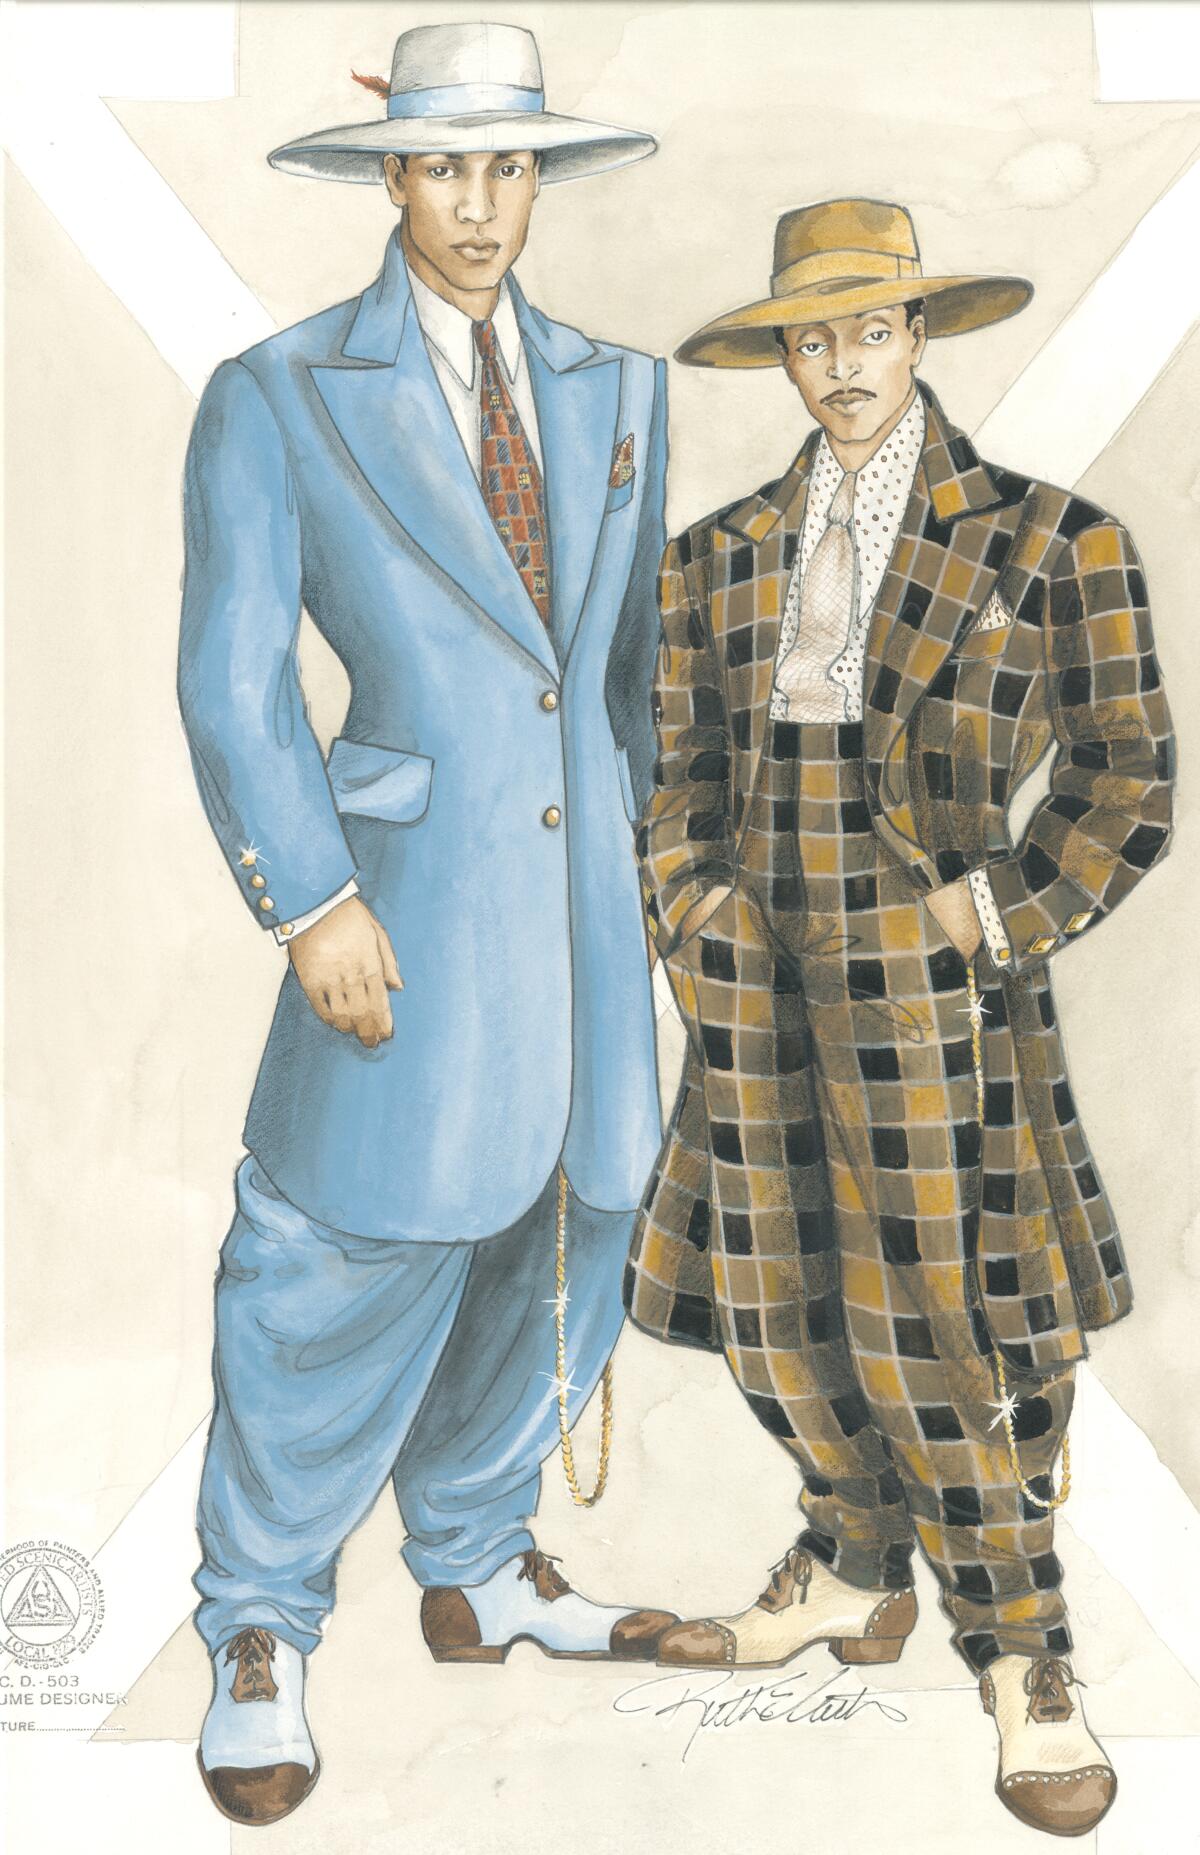 Sketch for costumes to be worn by Malcolm X (Denzel Washington) and Shorty (Spike Lee) in the film "Malcolm X."